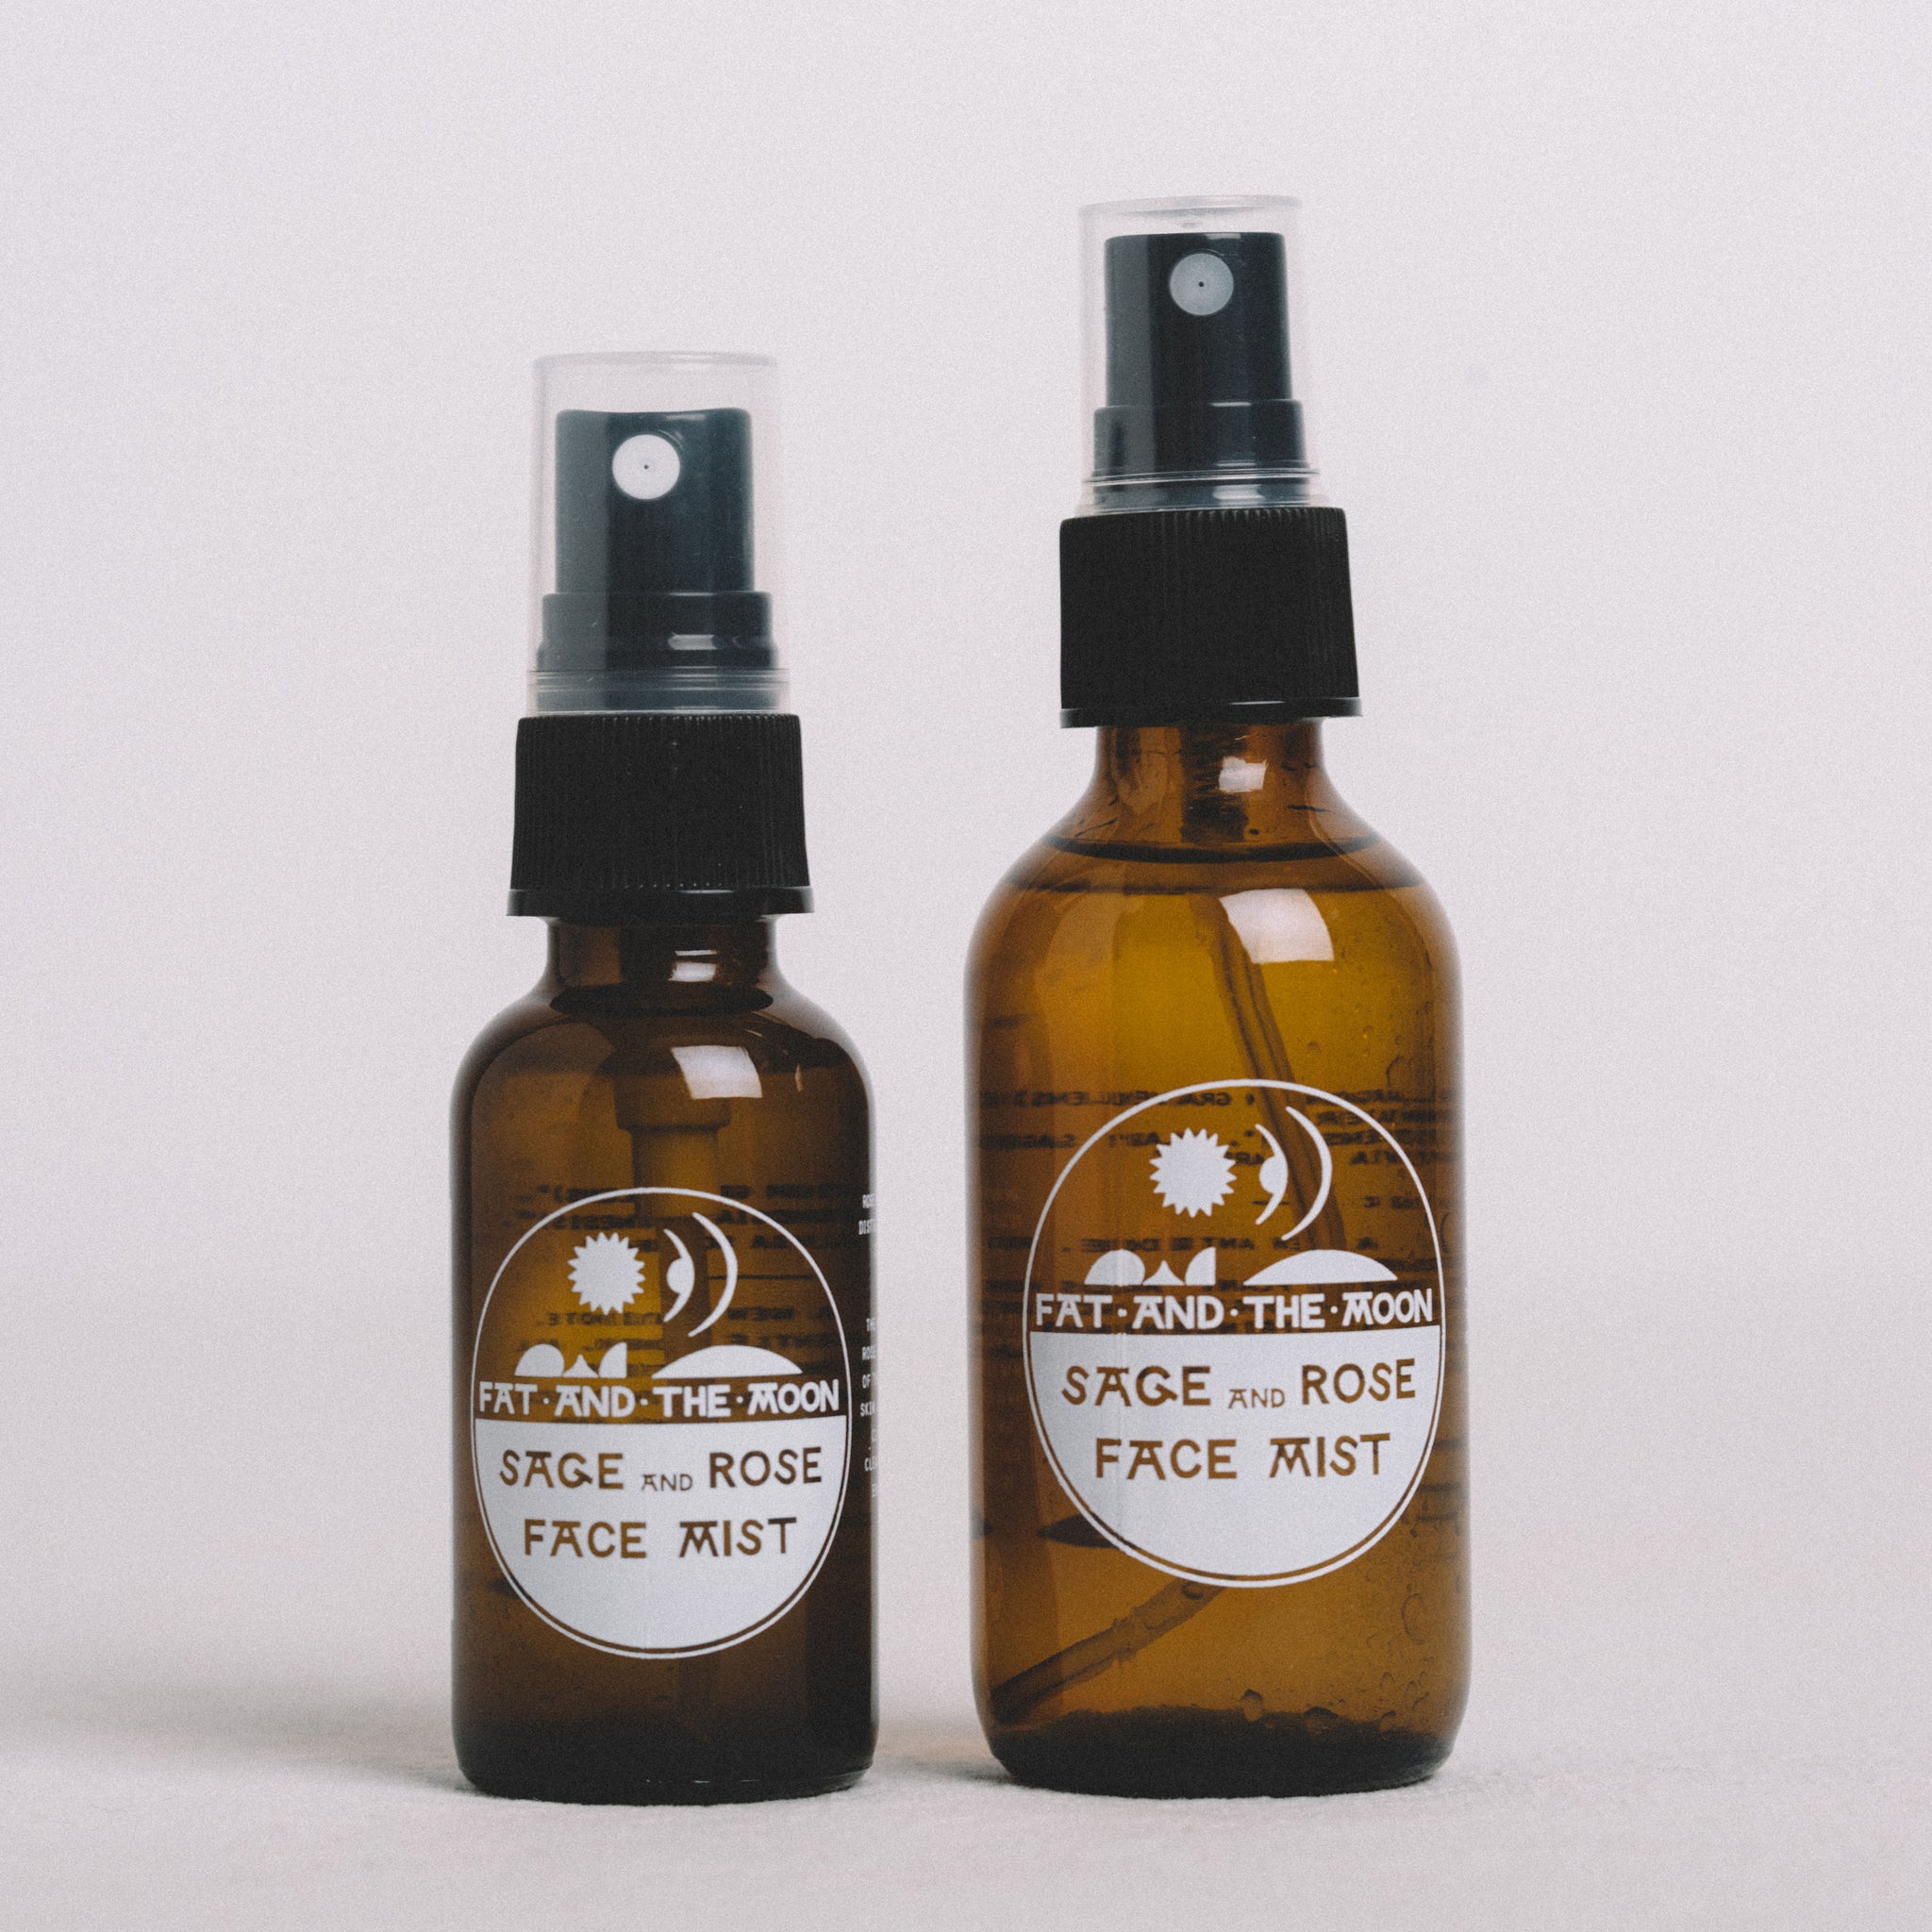 SAGE & ROSE FACE MIST || FAT AND THE MOON